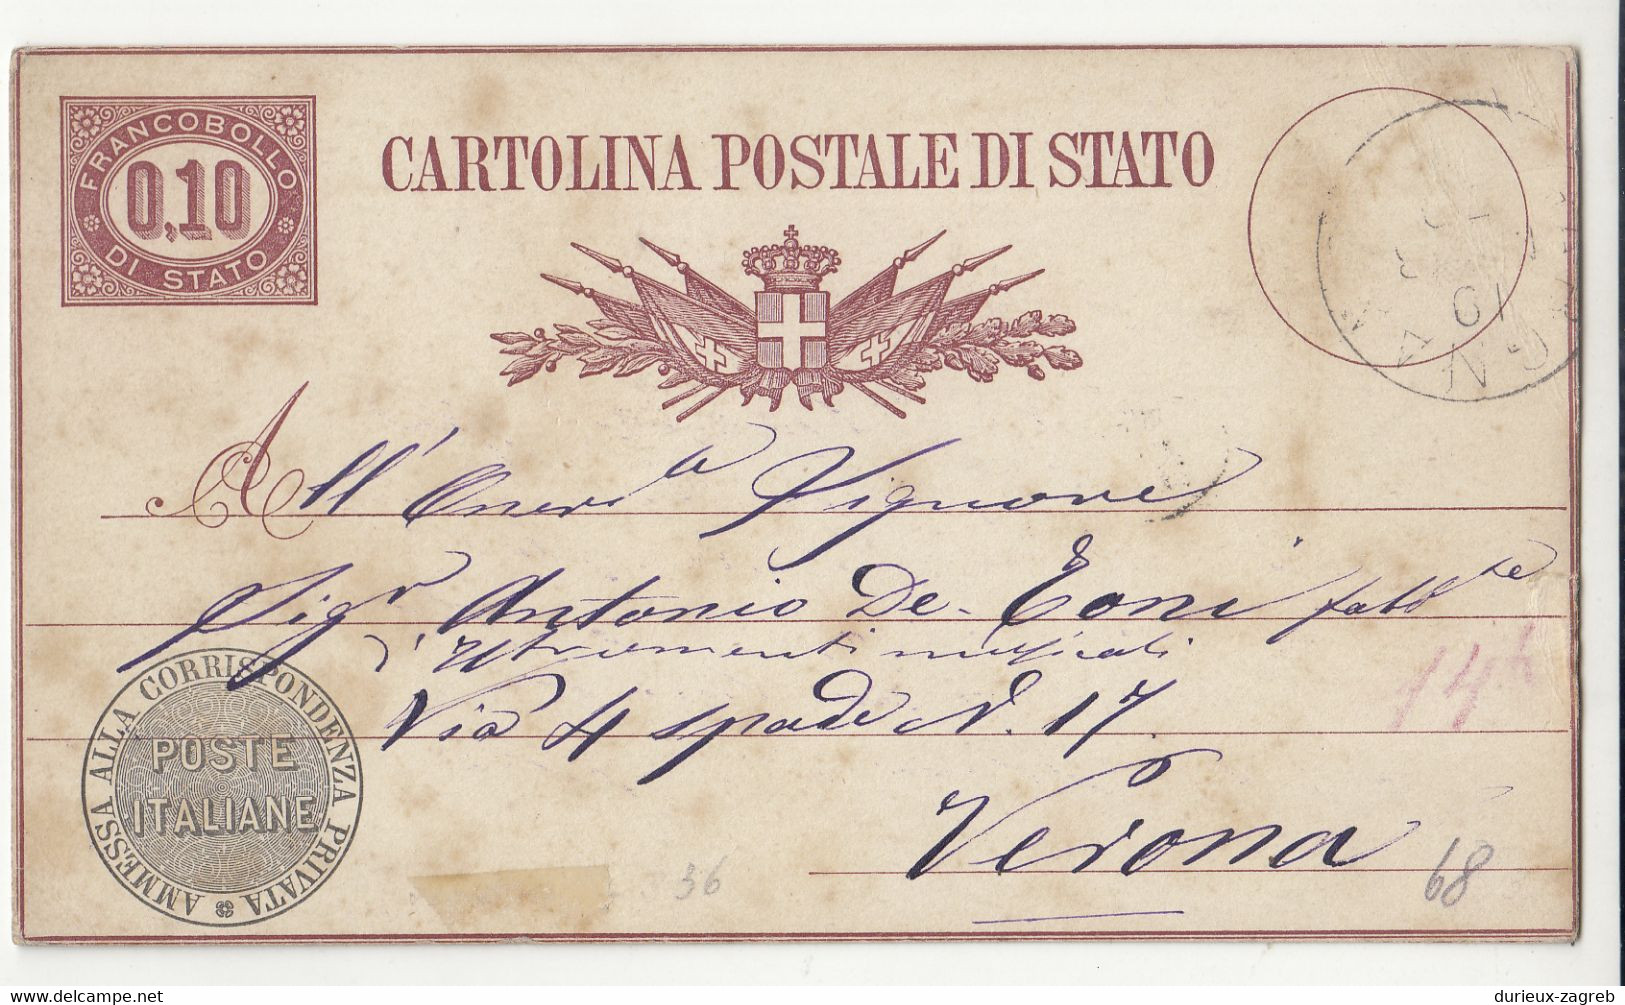 Italy Official Postal Stationery Postcard Cartolina Postale Di Stato Posted 18?? B230120 - Ganzsachen